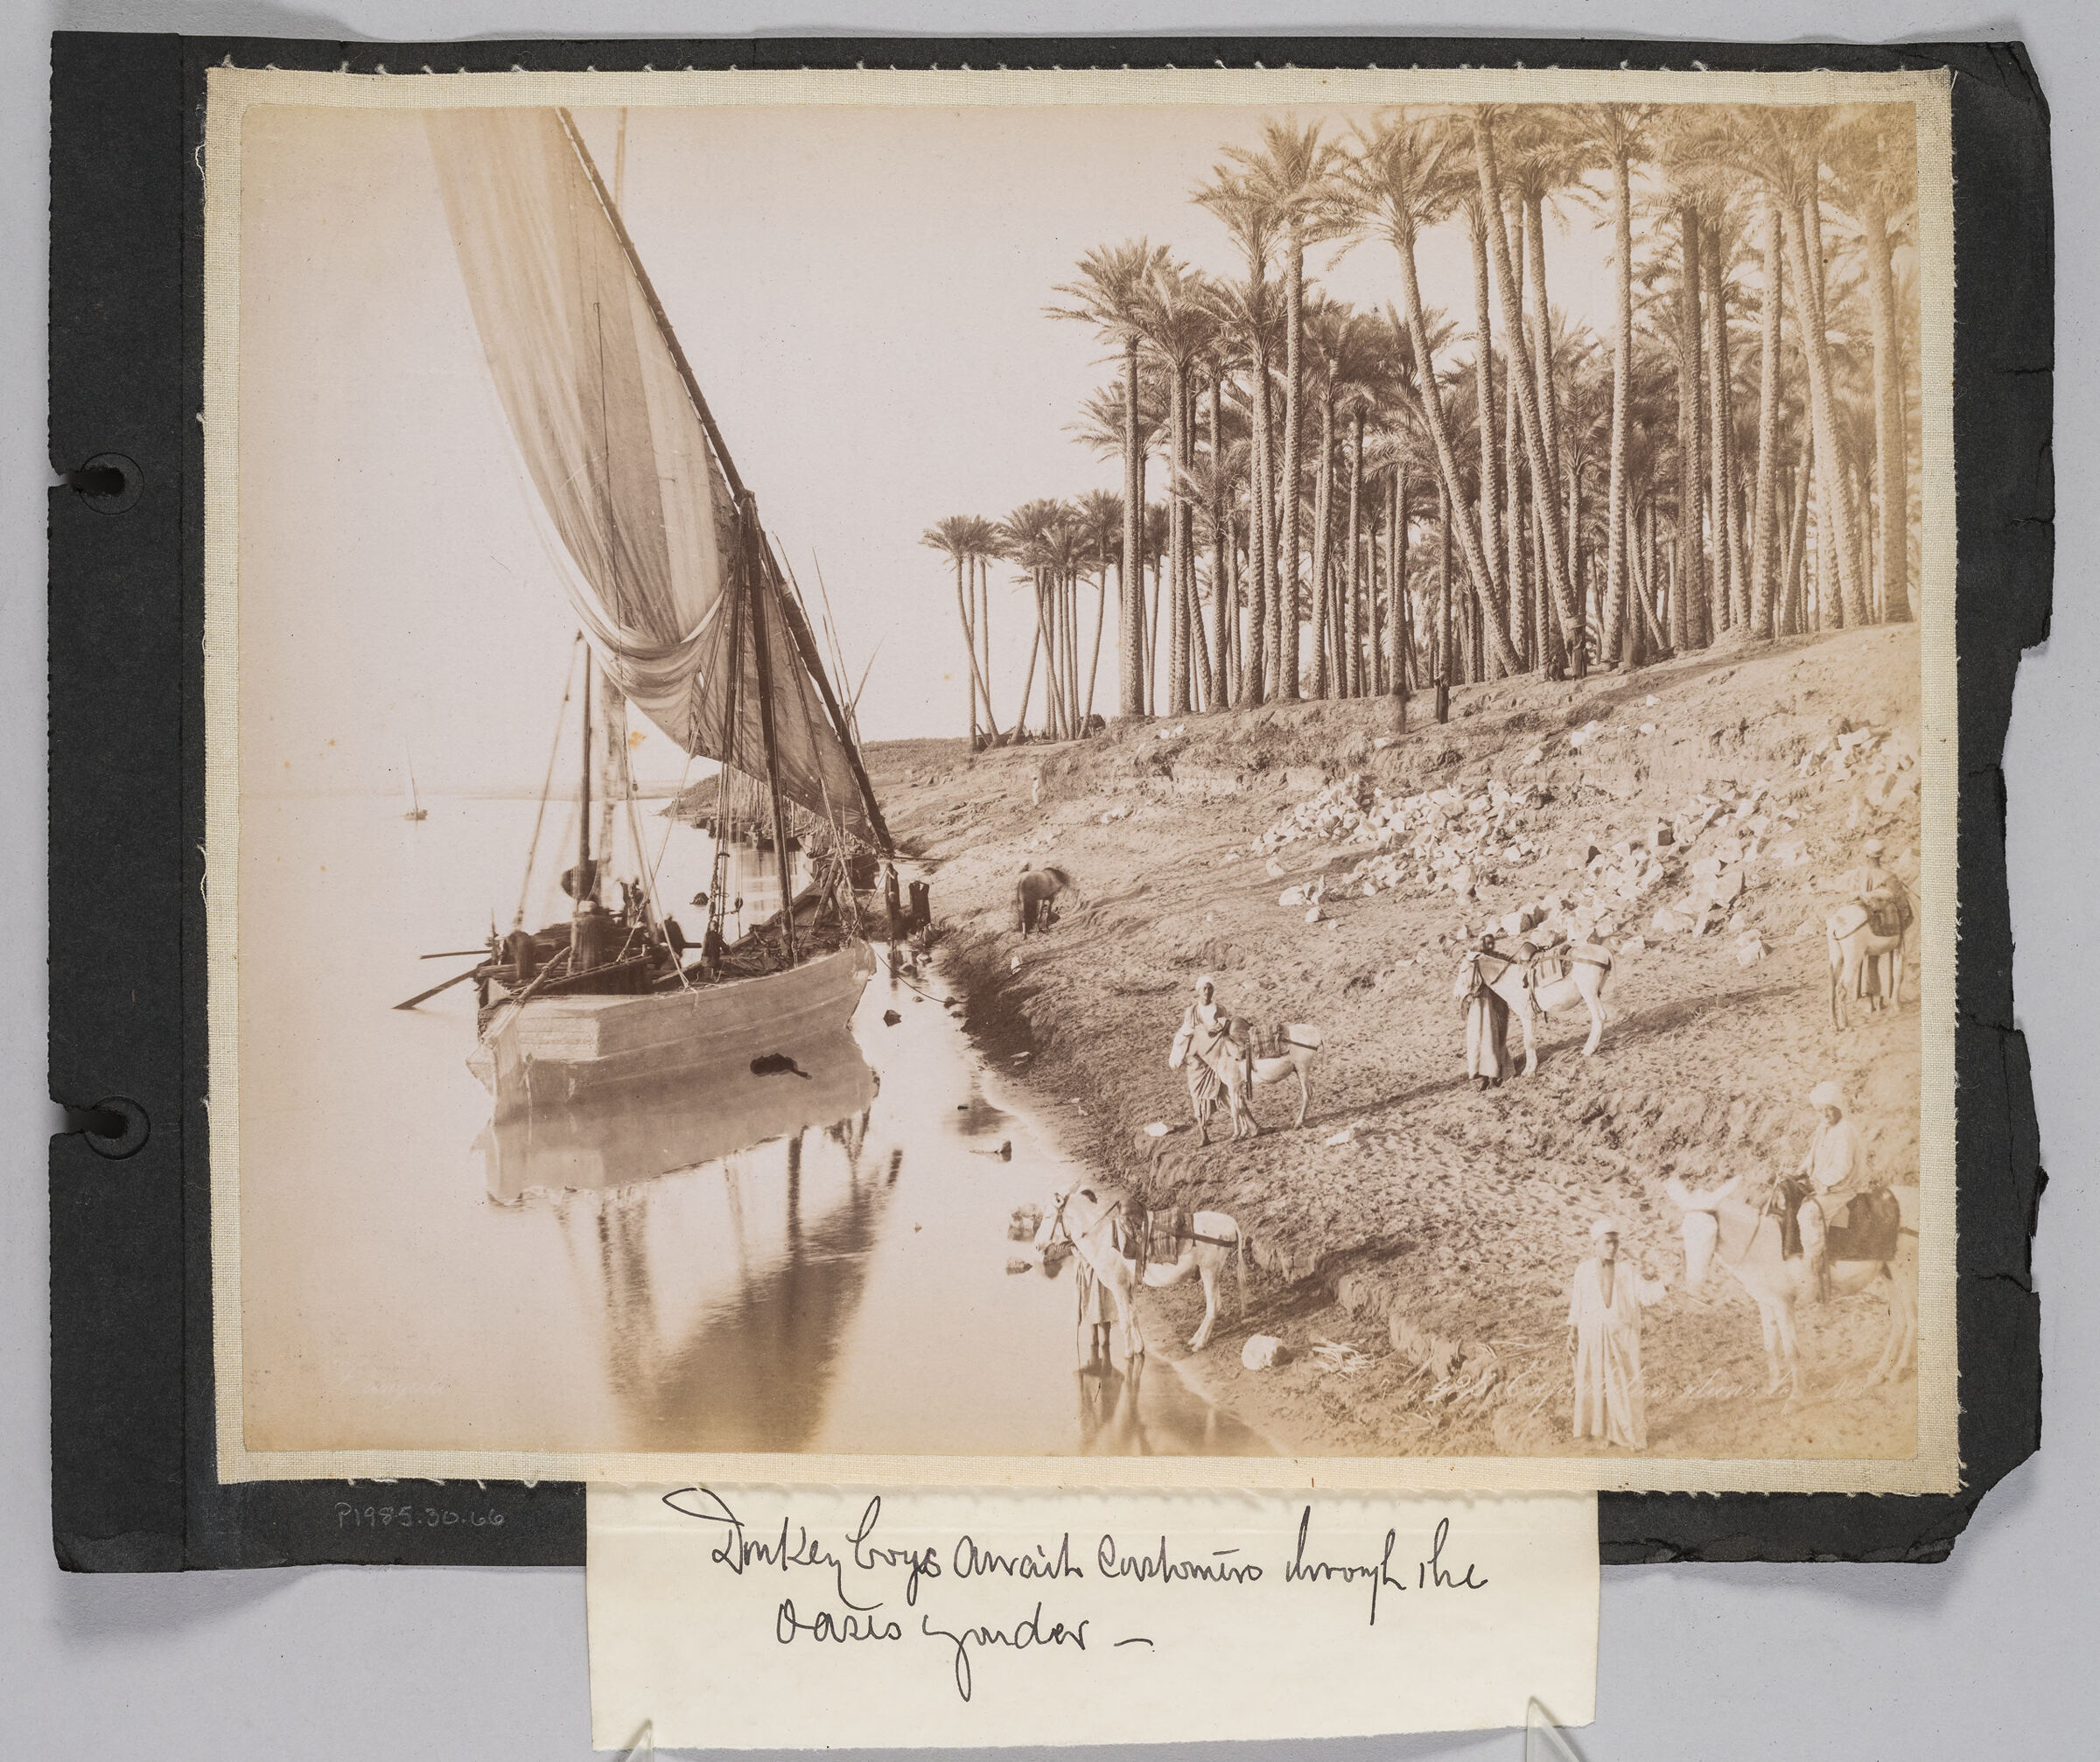 Untitled (Sailboat Near The River Bank, Men With Donkeys On Shore, Palm Trees In The Background)